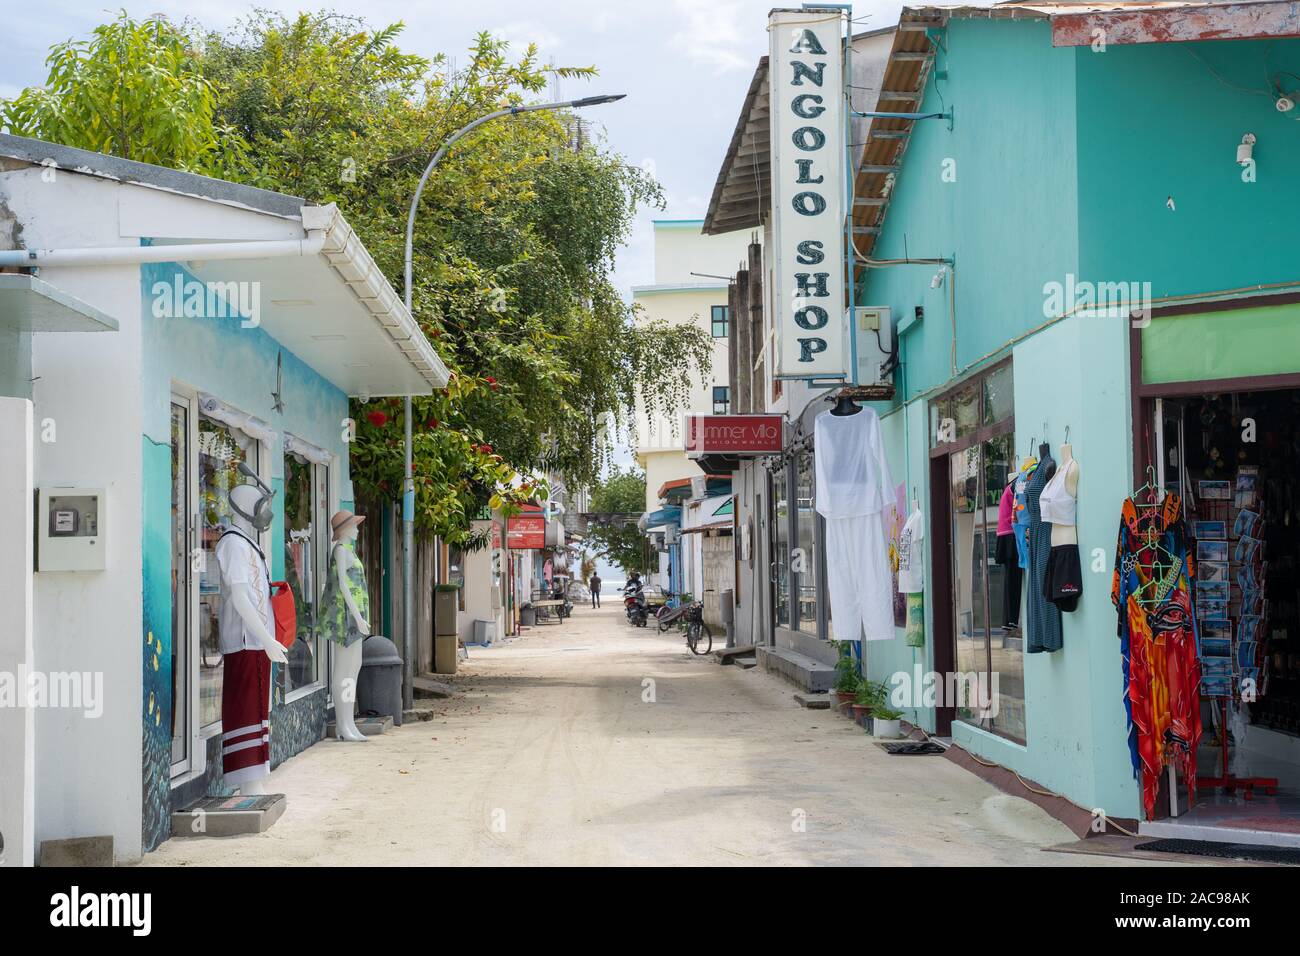 Maafushi Island, Maldives - November 26, 2019: Souviner shops and gift stores for tourists line the streets of Maafushi in the Maldives Stock Photo